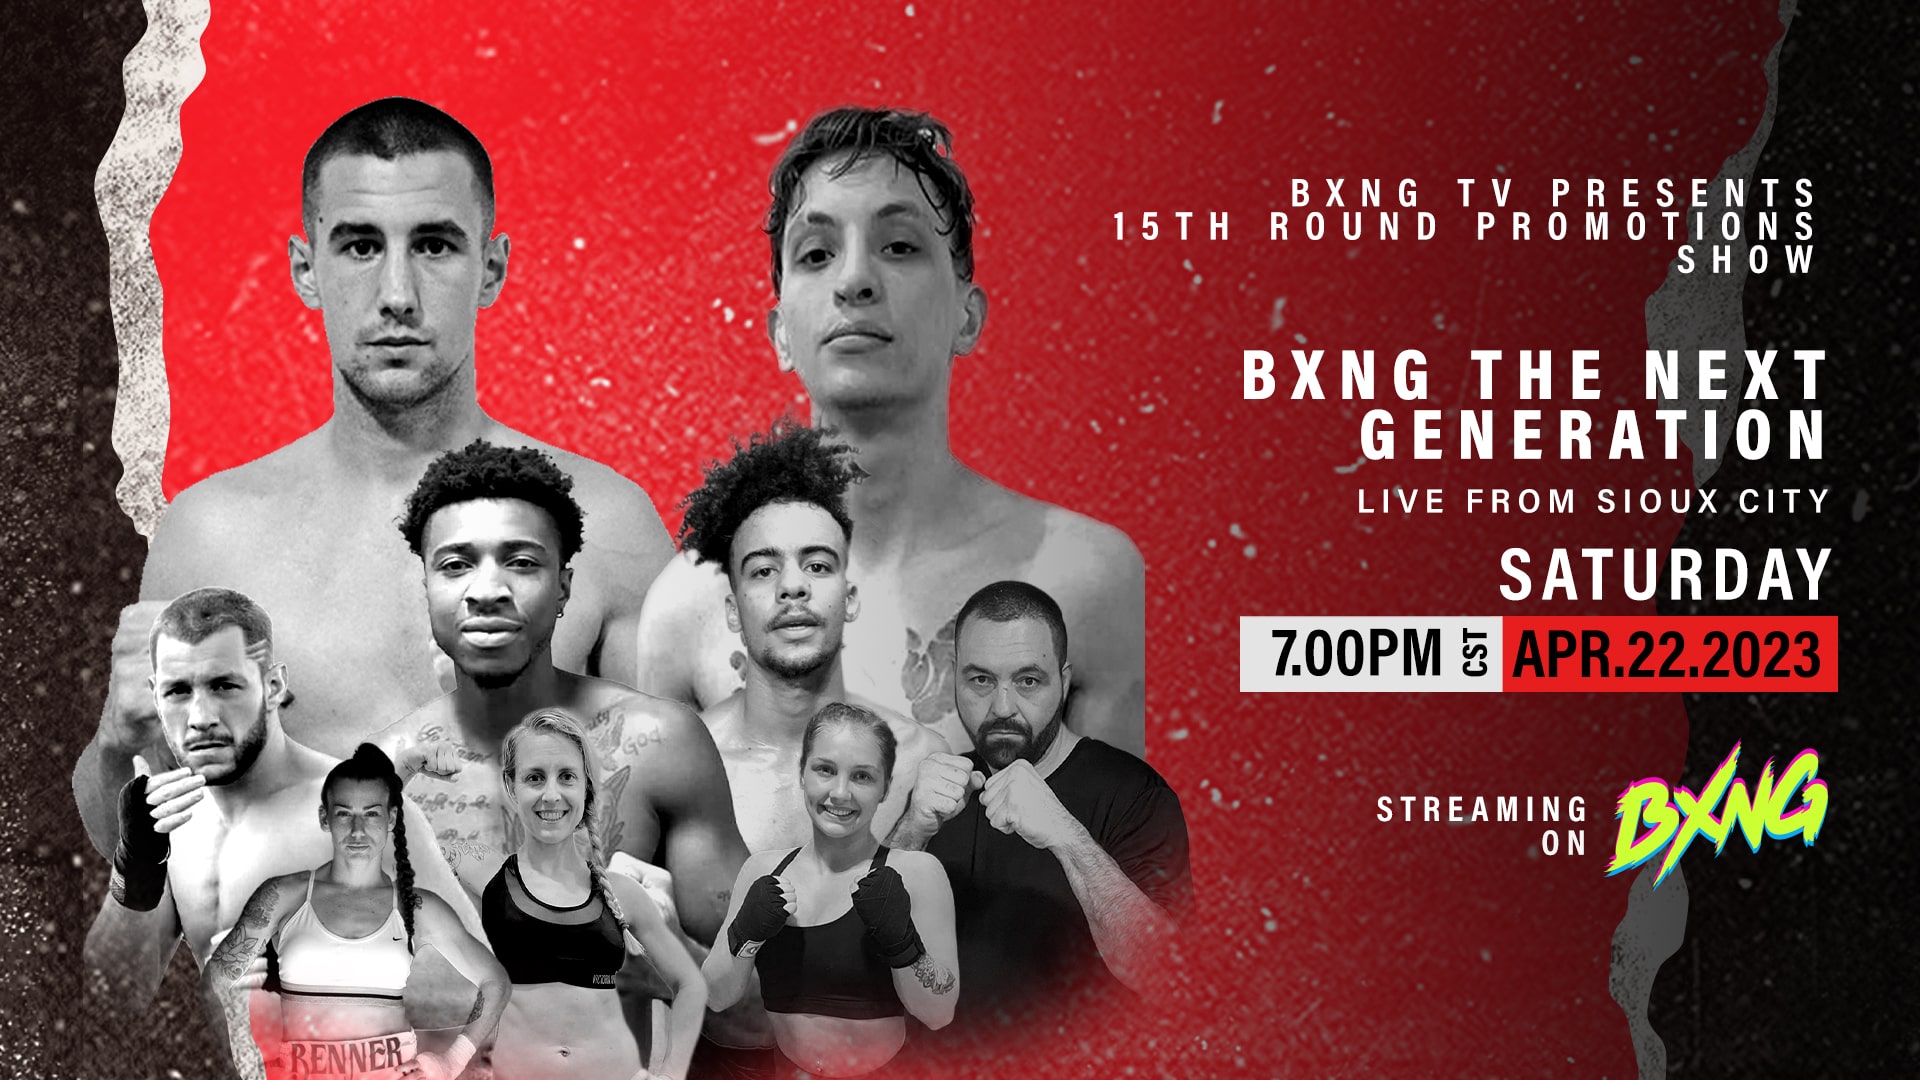 BXNG TV Presents 15th Round Promotions Show Live Stream 04/22/23